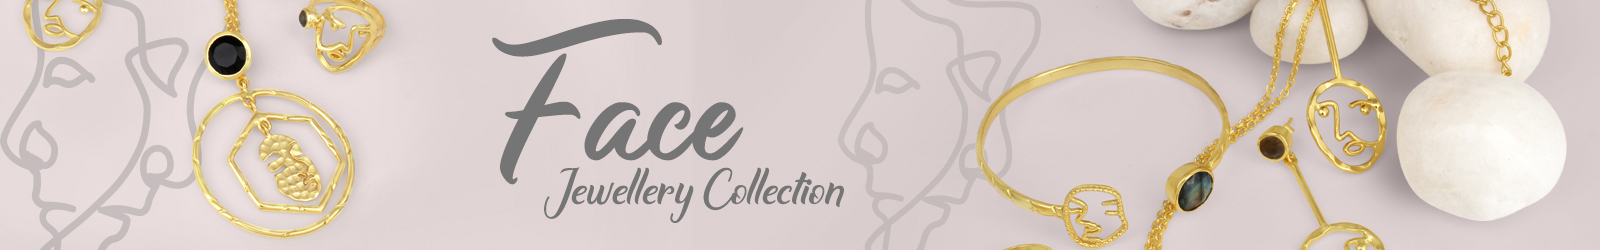 Face Jewellery Collection